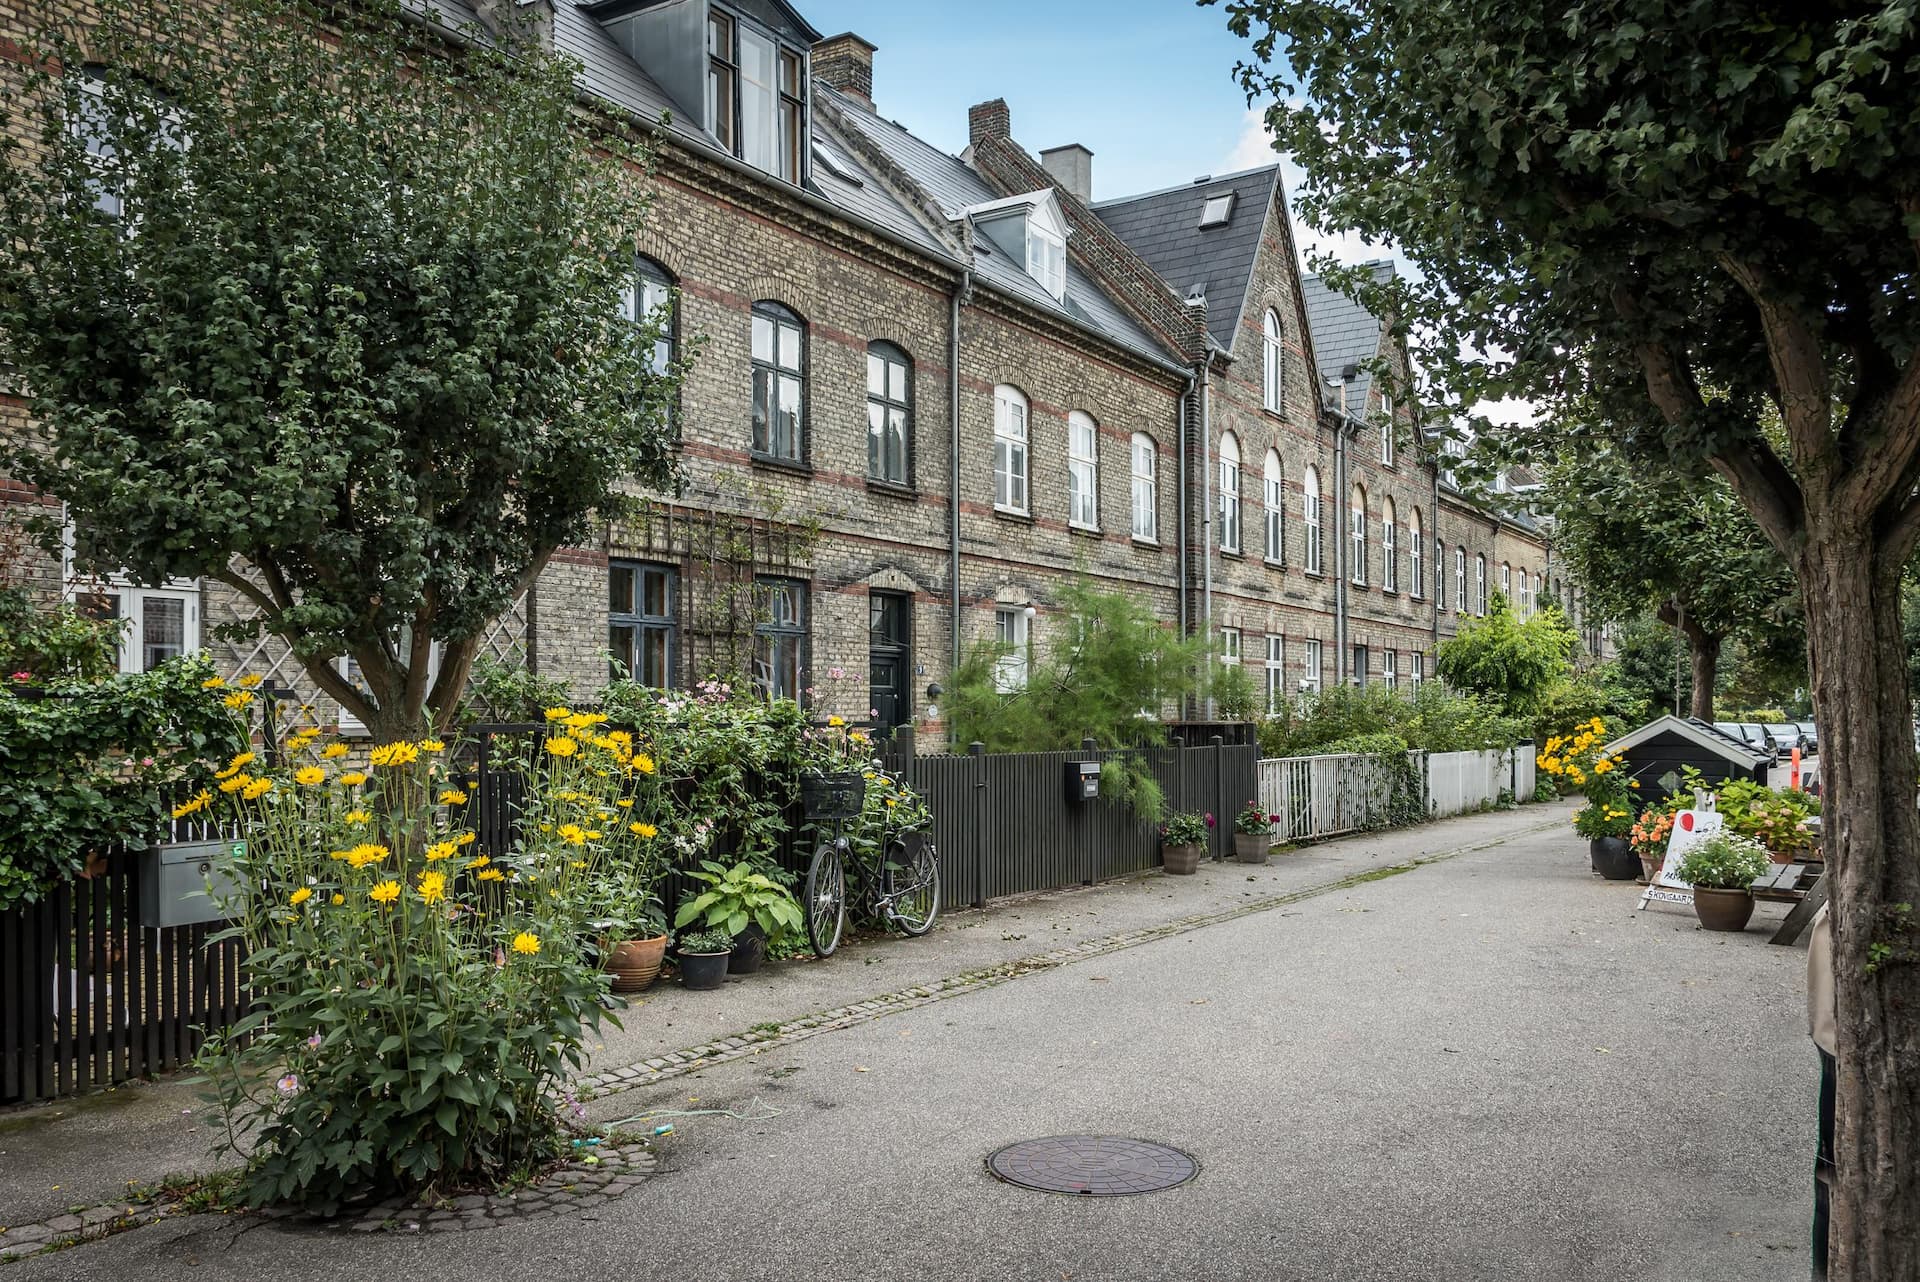 The Potato rows, old housing for working people in Copenhagen, Denmark, August 16, 2019